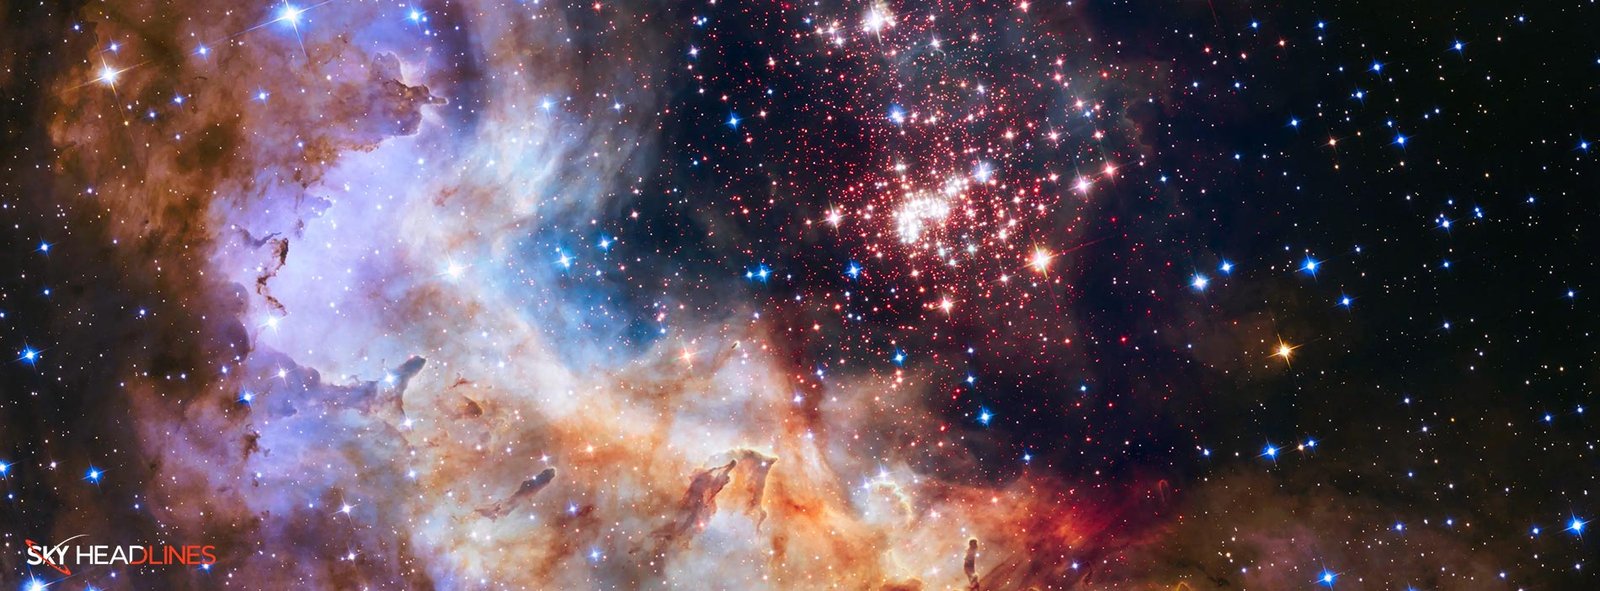 What did Hubble see on your birthday?